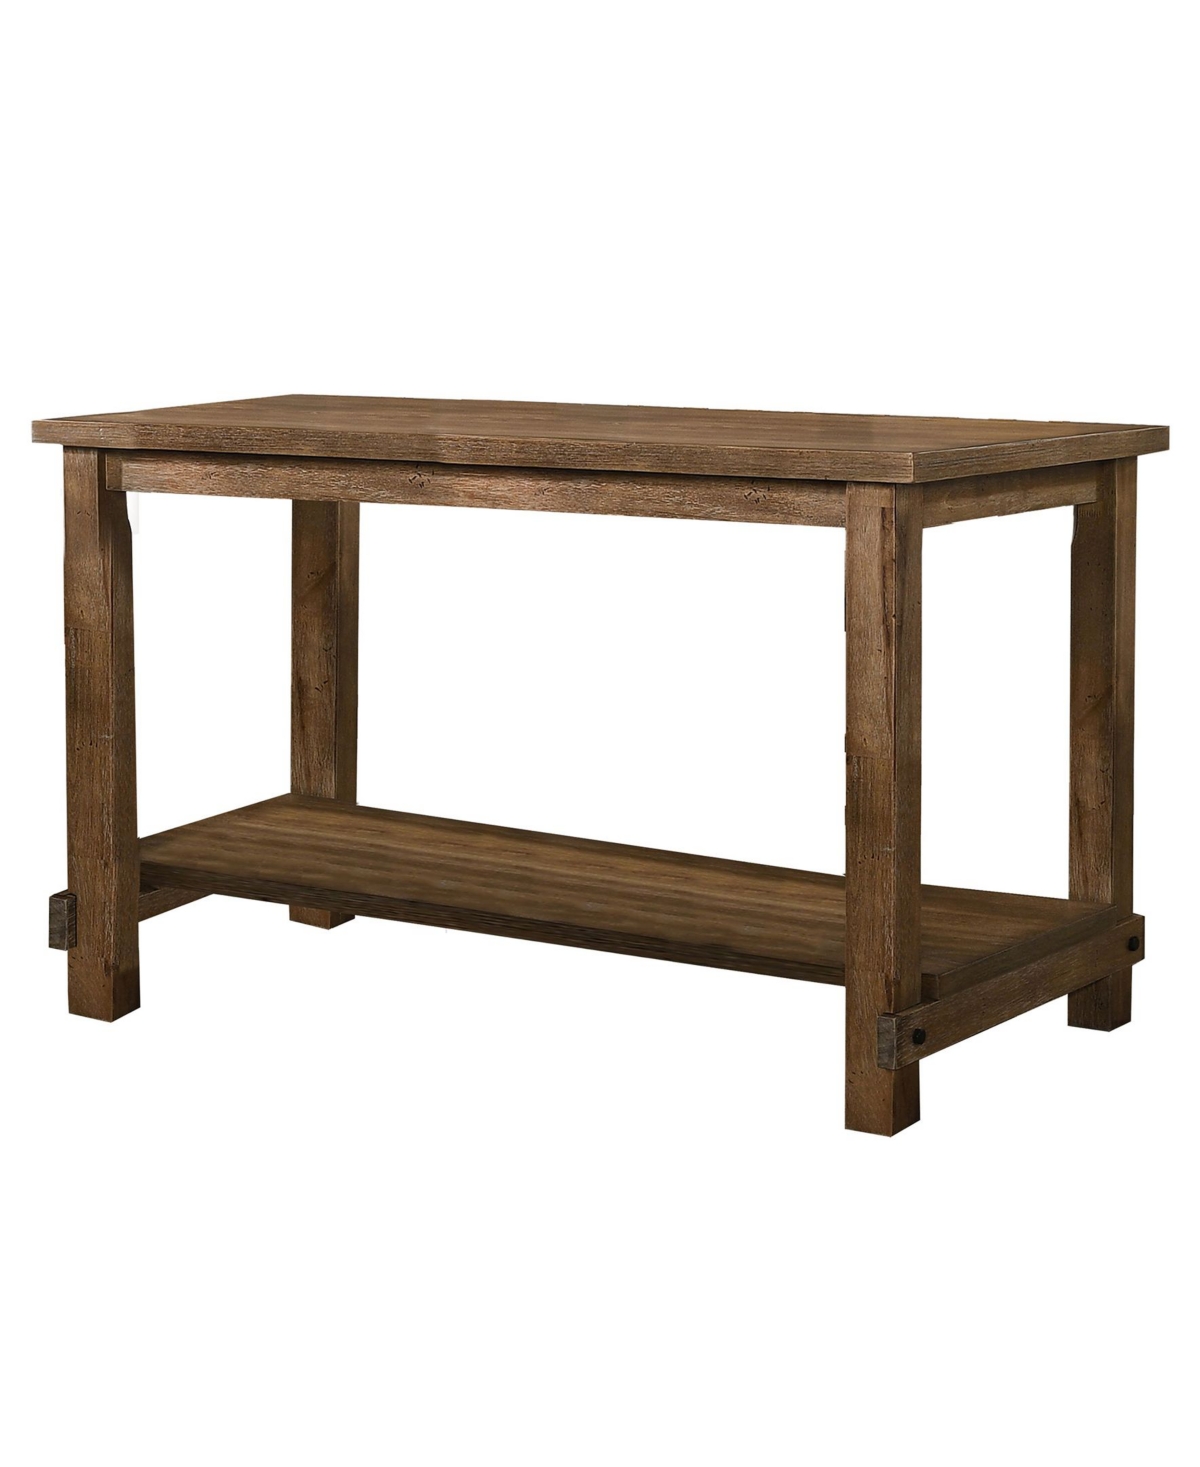 Best Master Furniture Janet Driftwood Transitional Counterheight Table In Antique Natural Oak